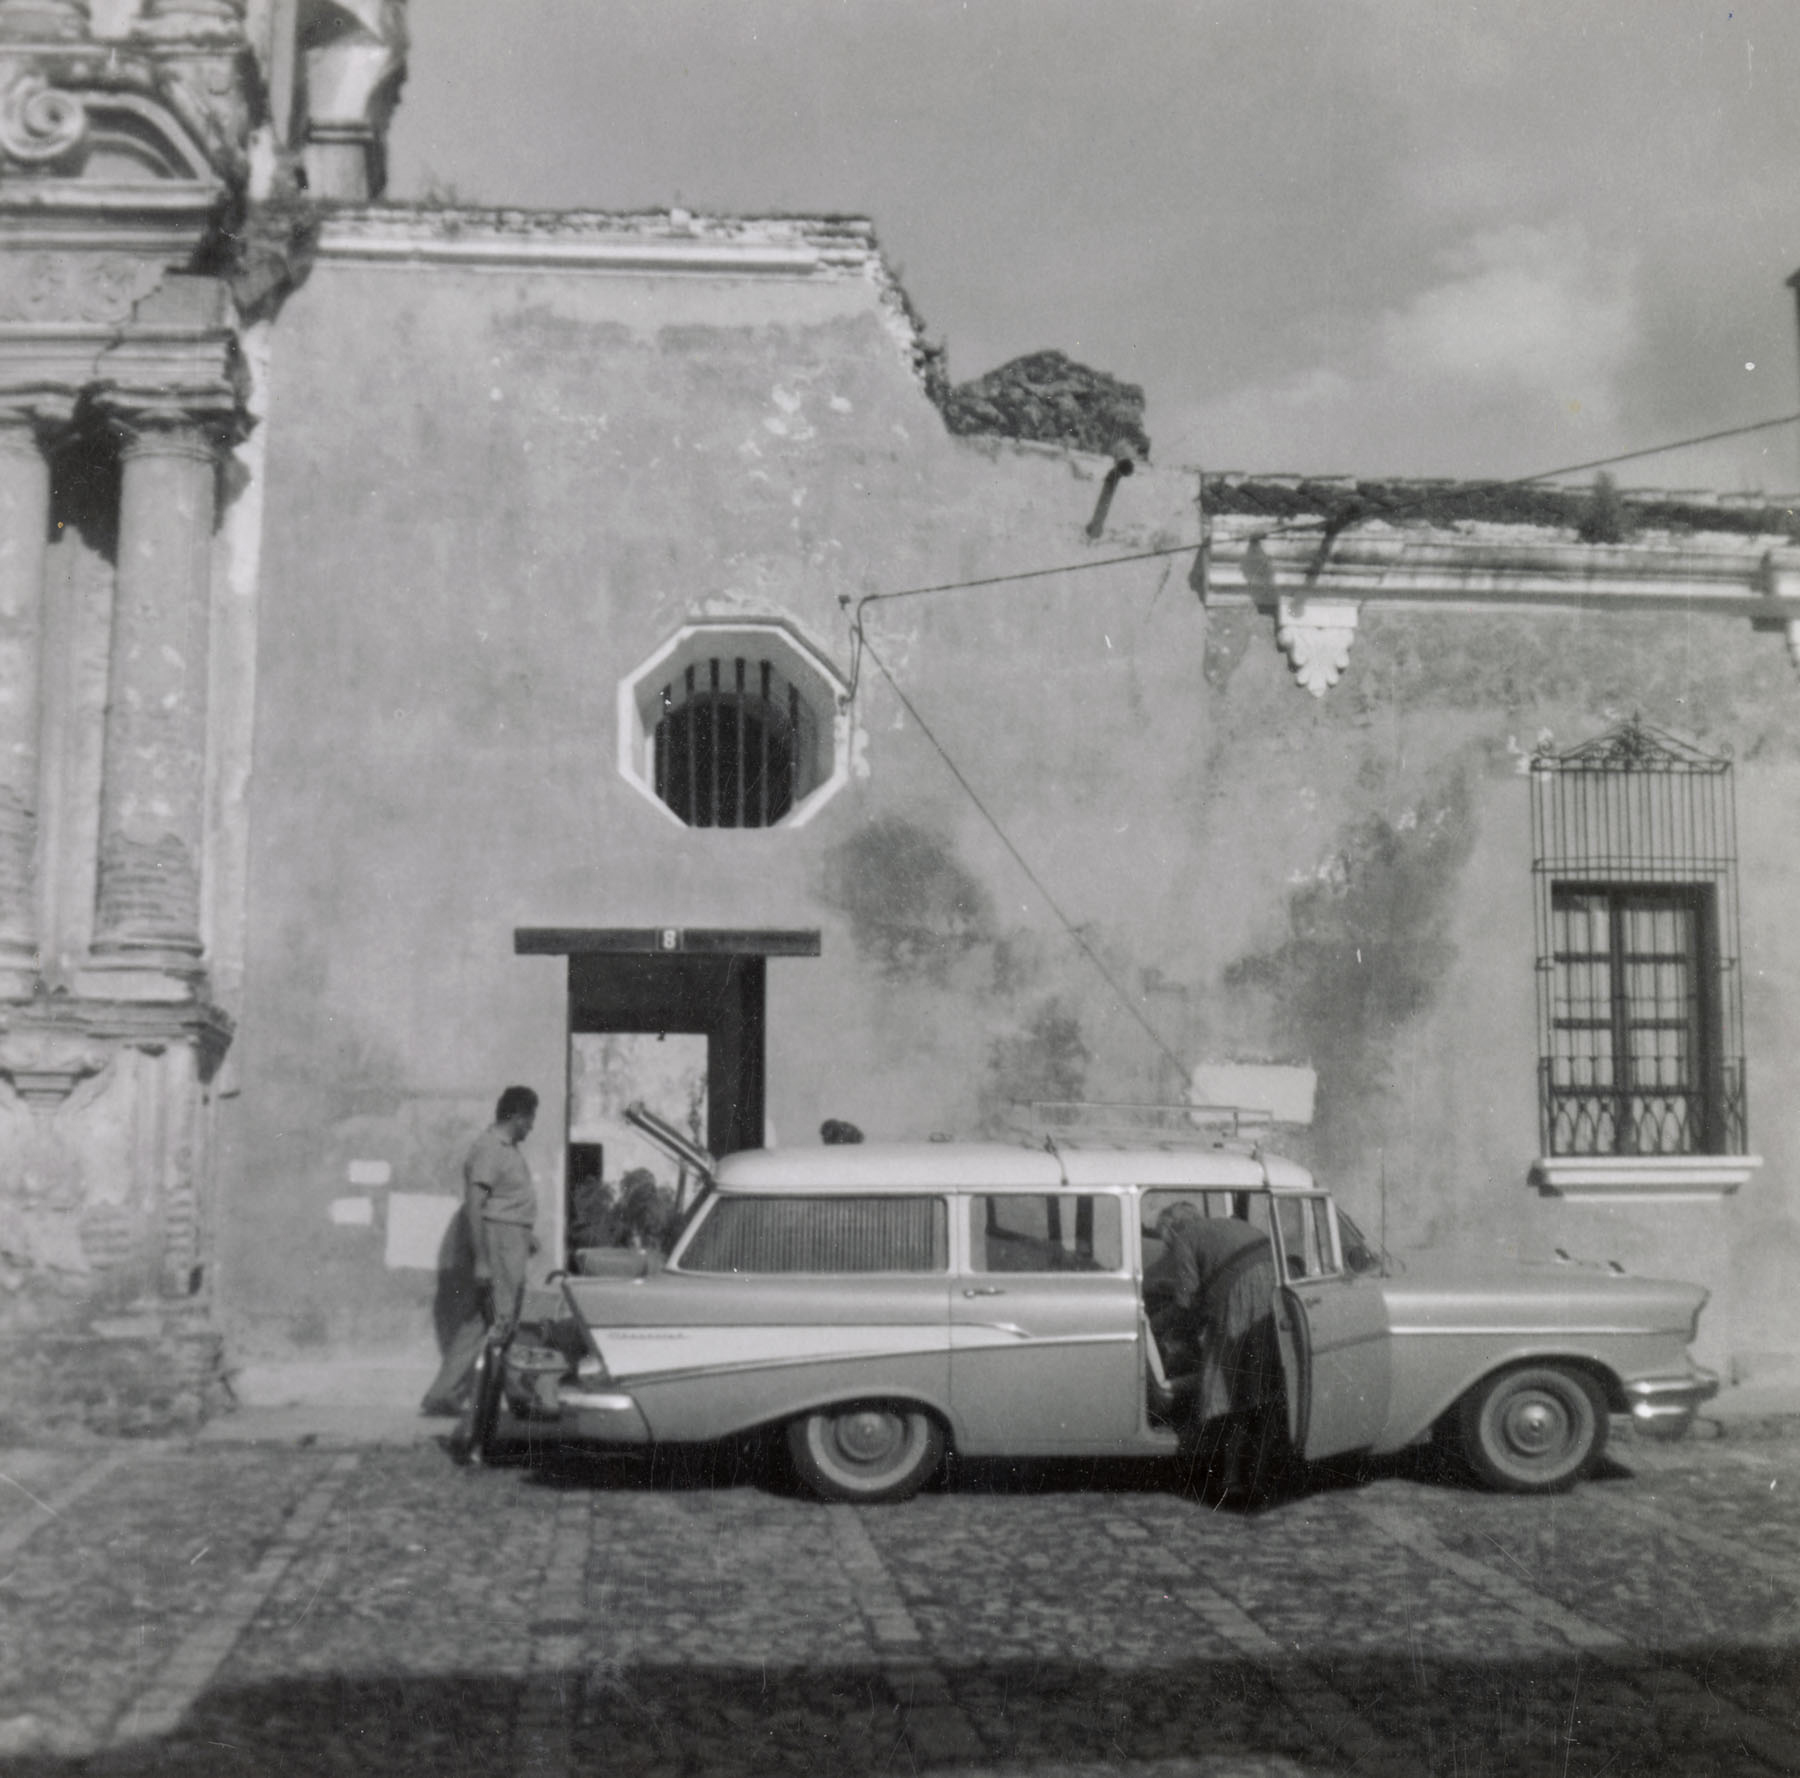 Black-and-white photo of two people standing near a 1950‘s style station wagon parked in front of a building.